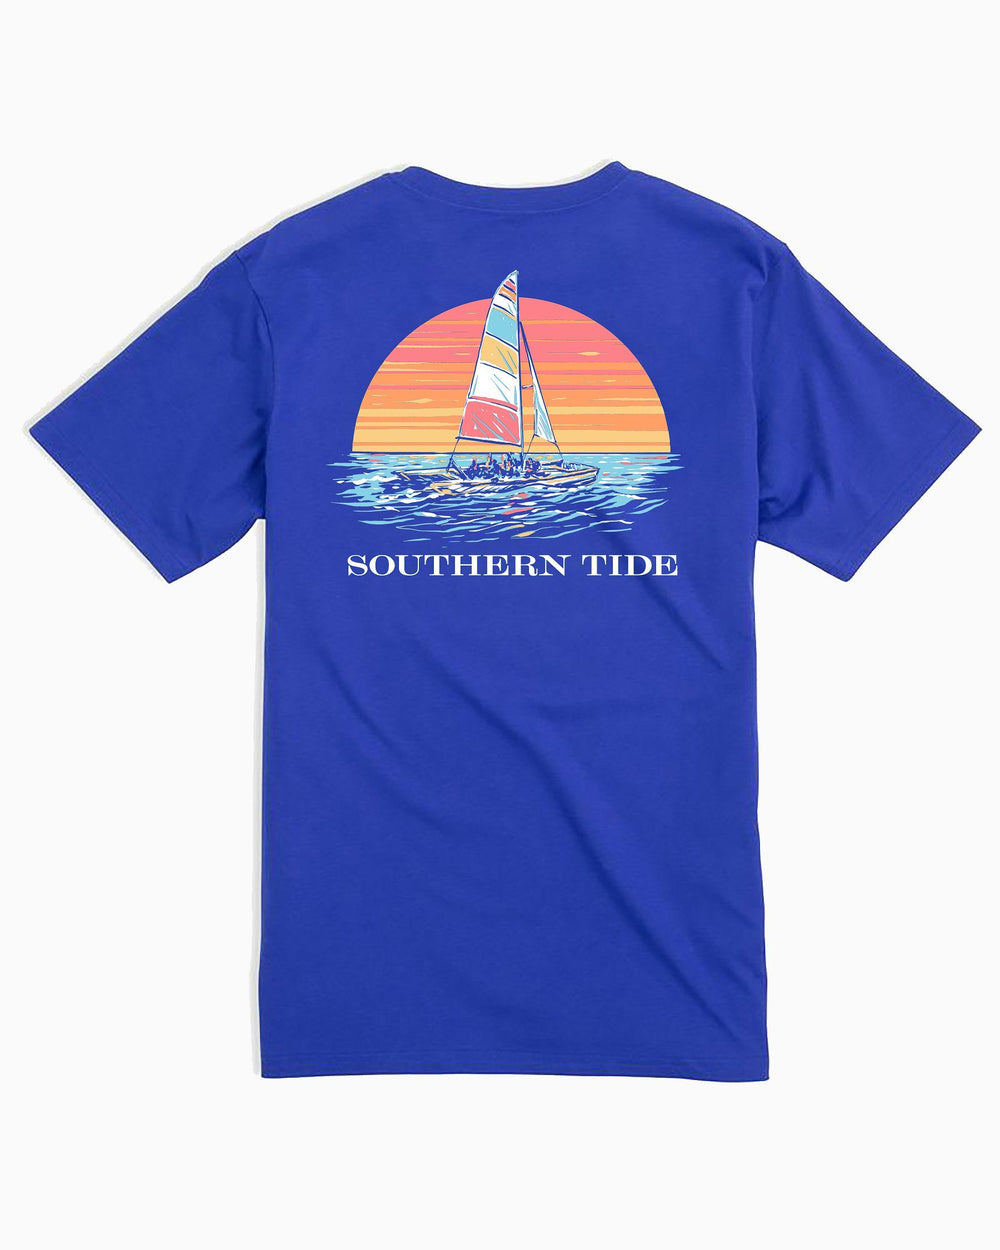 The back view of the Sunset Silhouette T-Shirt by Southern Tide - University Blue